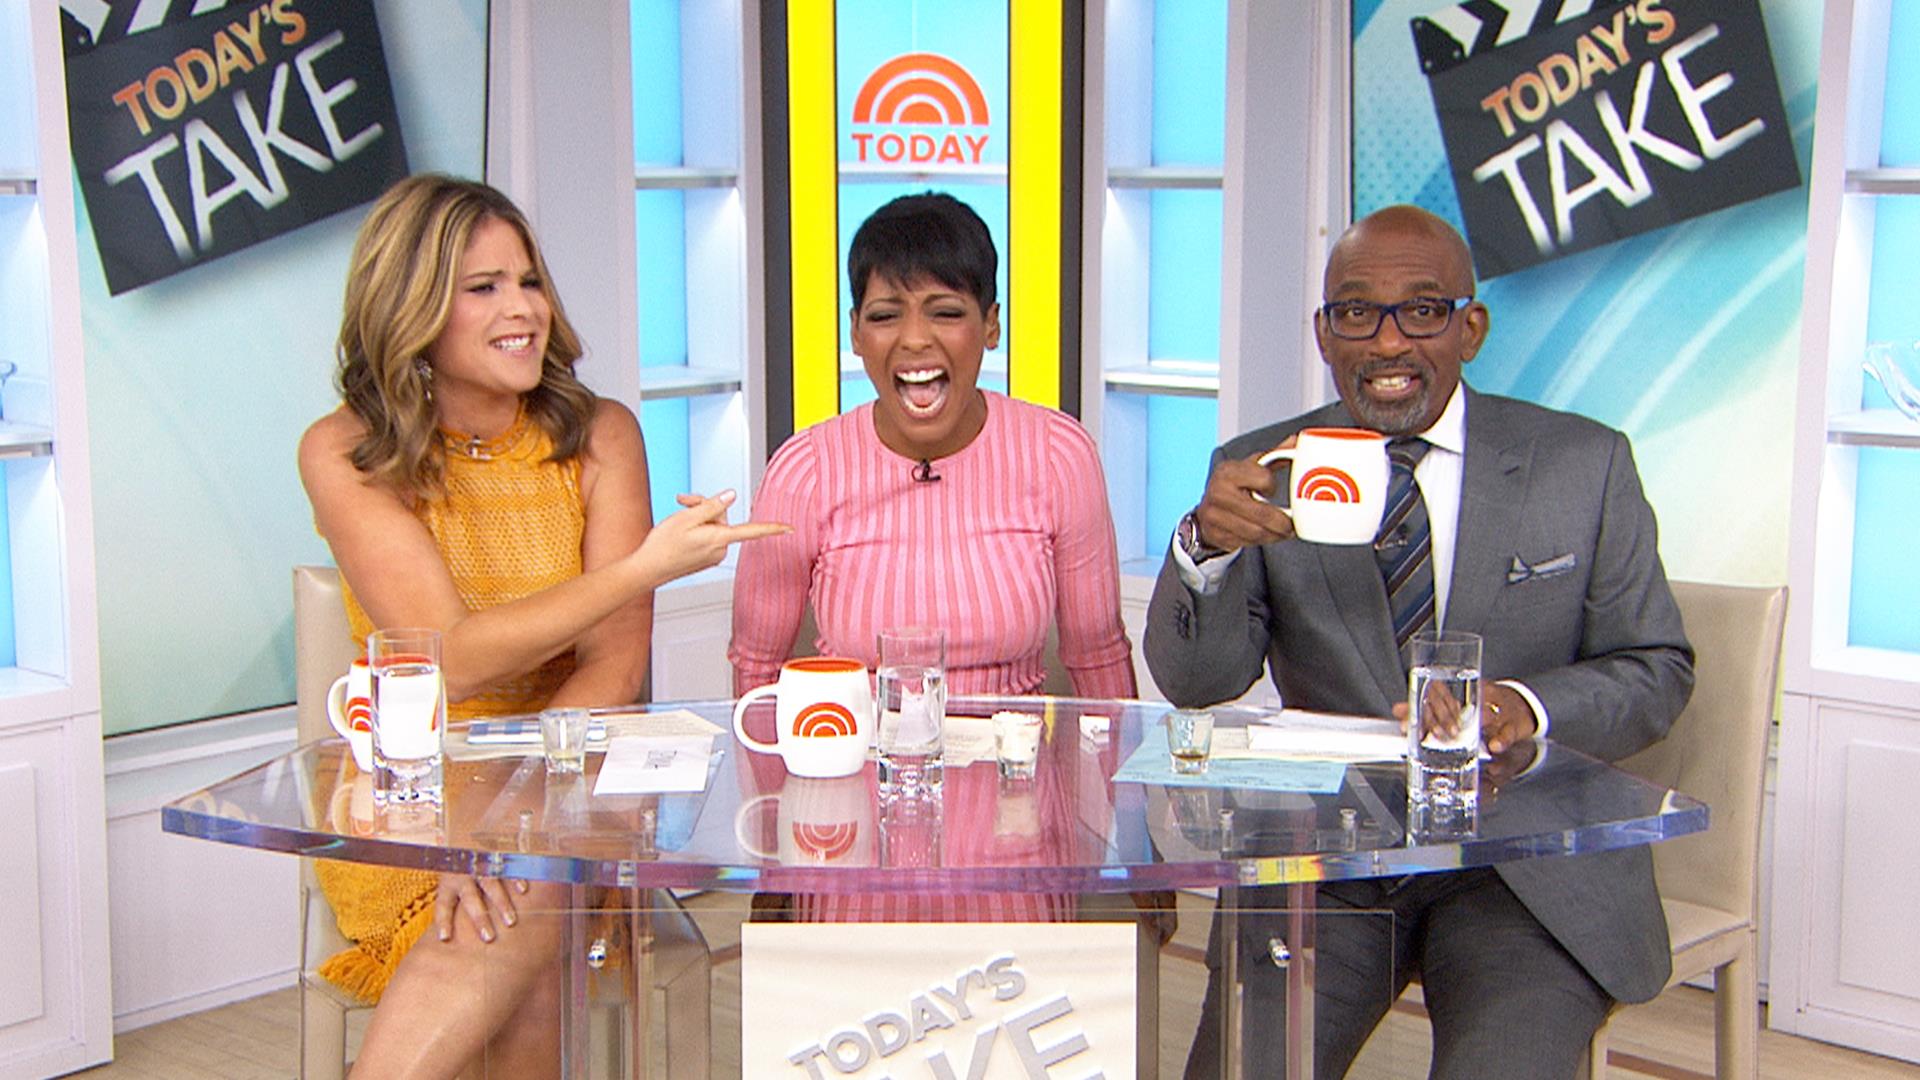 Truth or Dare: Watch Tamron Hall skip truth, take dare to drink something weird